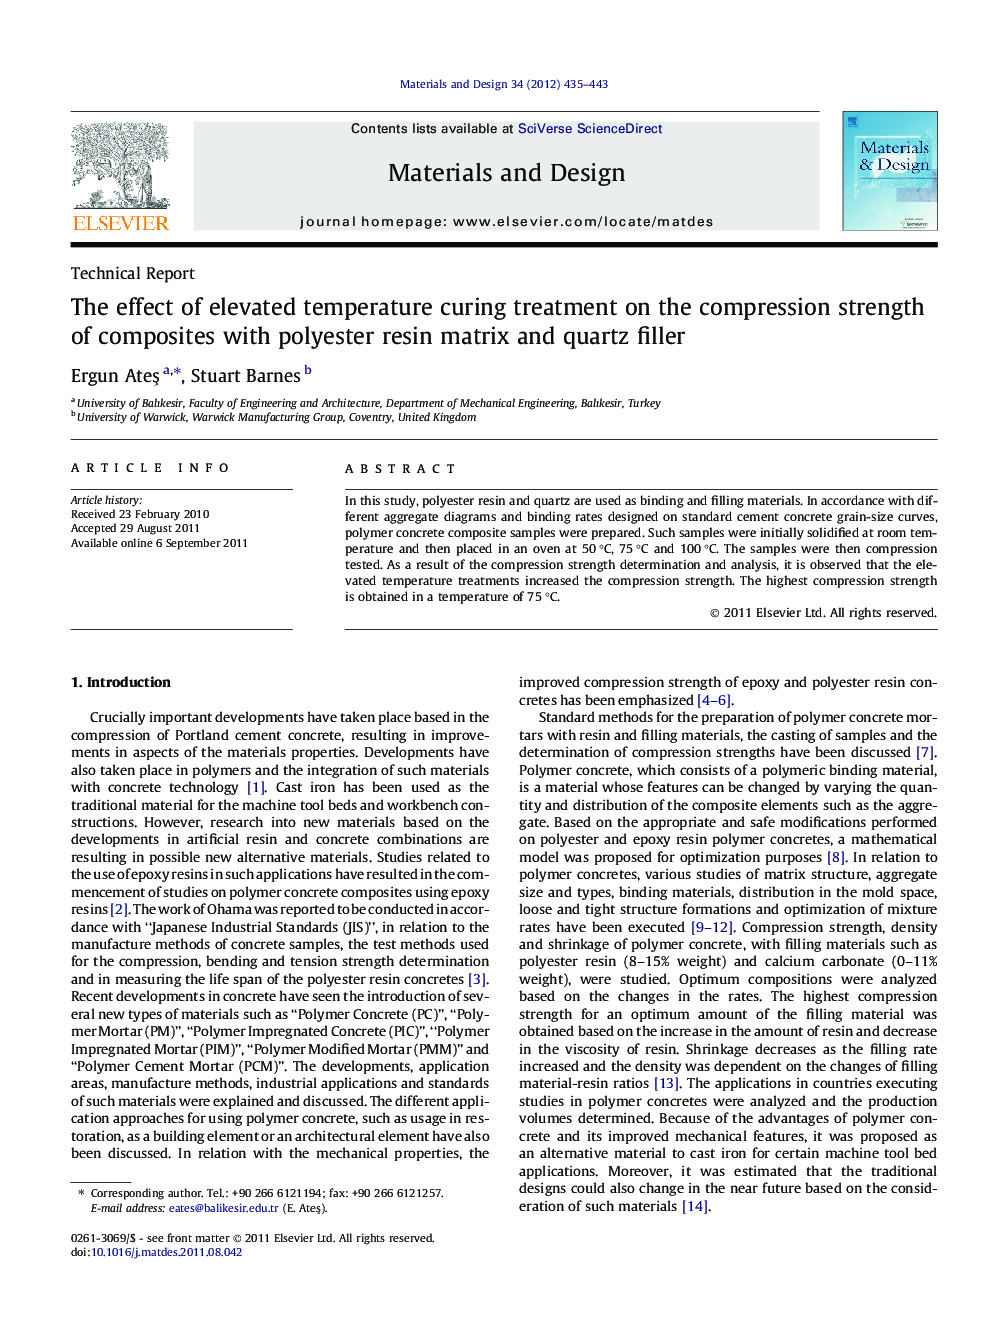 The effect of elevated temperature curing treatment on the compression strength of composites with polyester resin matrix and quartz filler